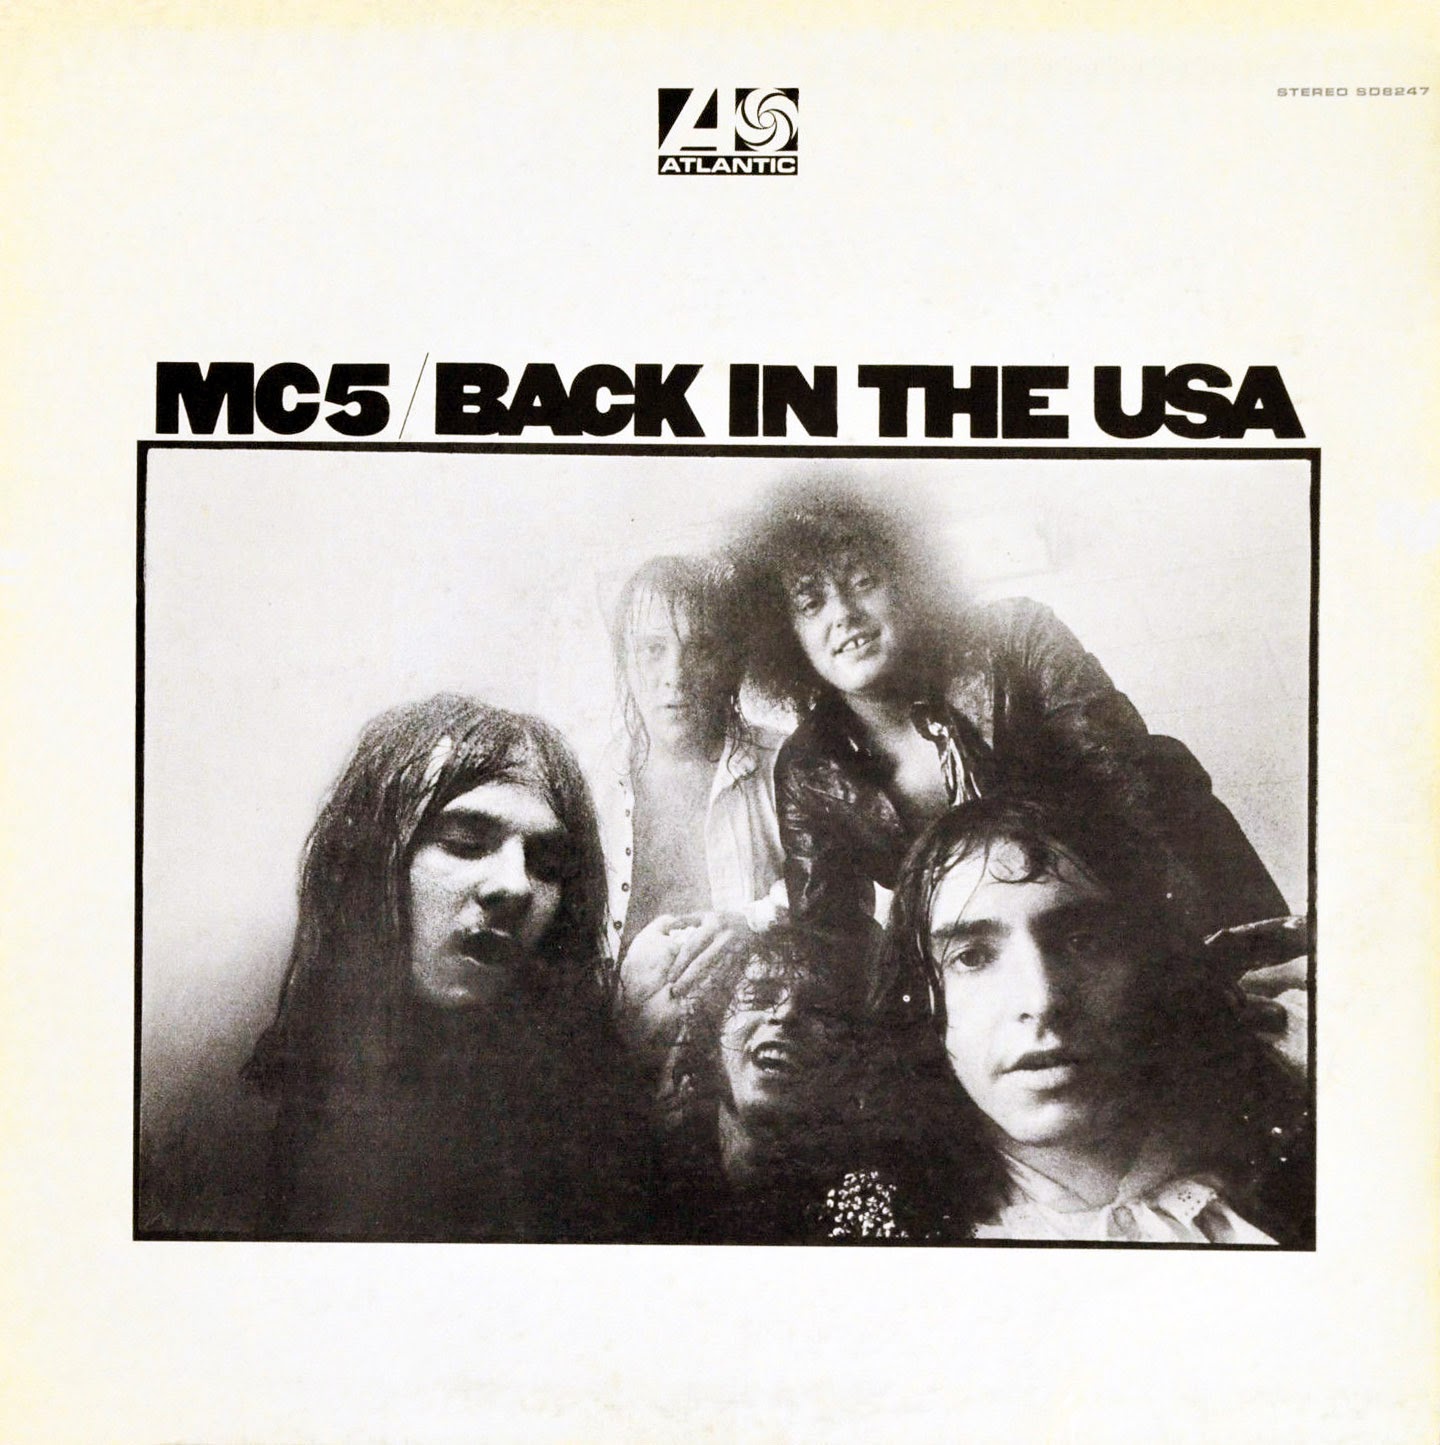 MC5 – Back in the USA album cover - Fonts In Use